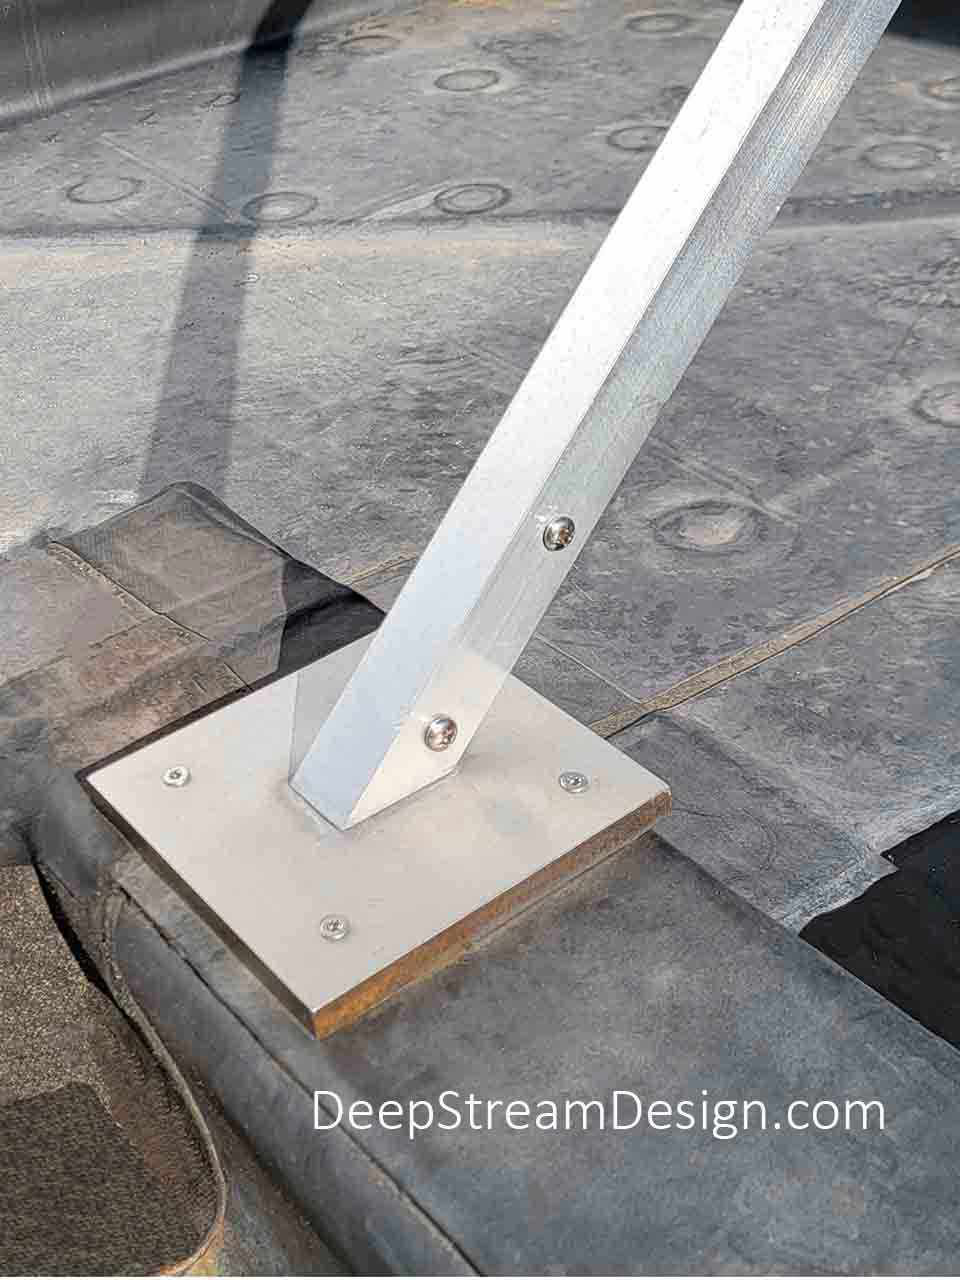 Rooftop photo showing the detail of a stainless steel foot pad anchoring the aluminum strut of a panel that makes up a Screen Wall enclosing Rooftop Mechanical Systems.